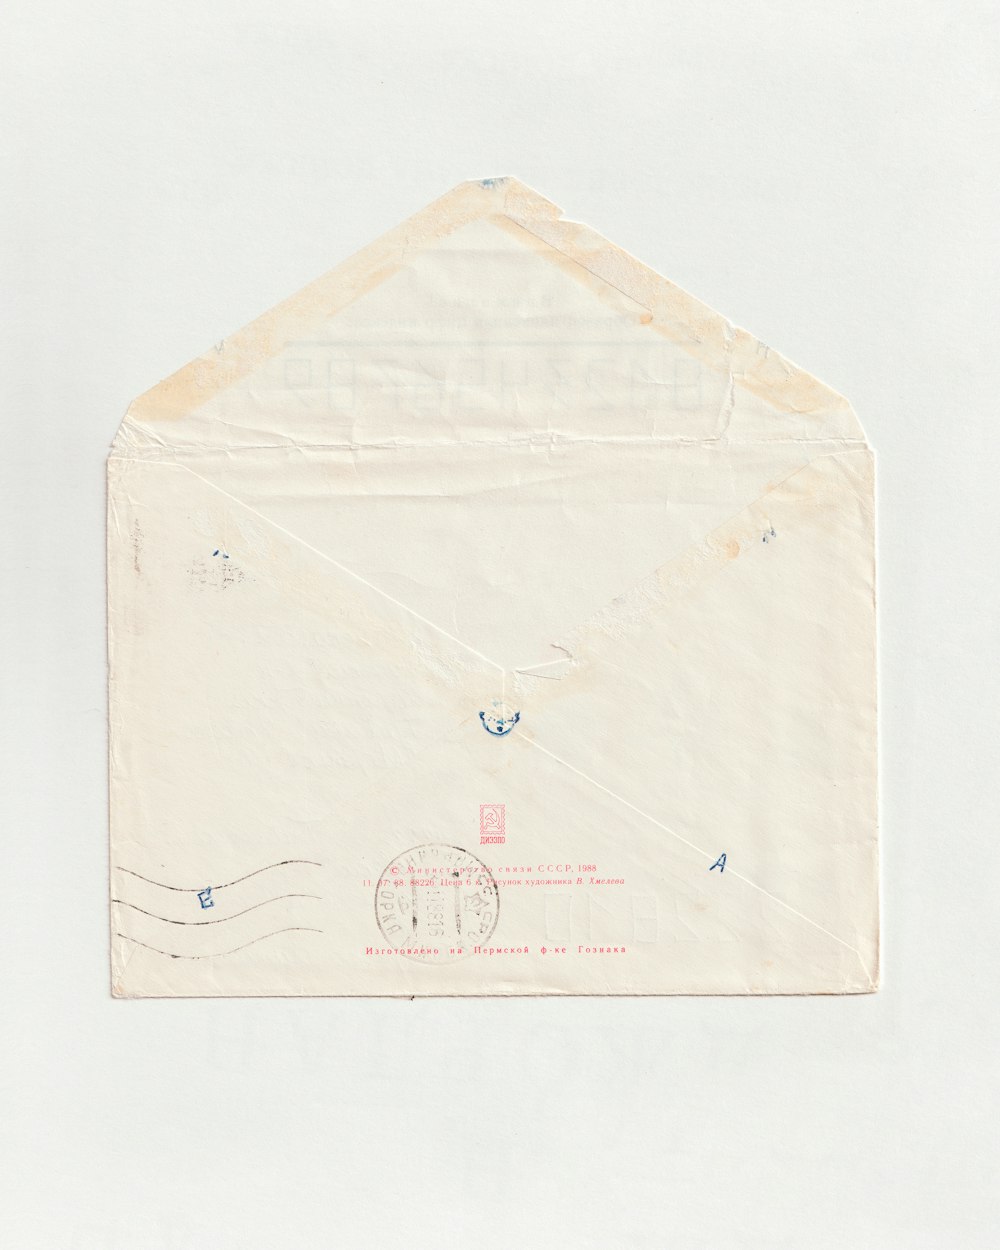 a white envelope with a red stamp on it